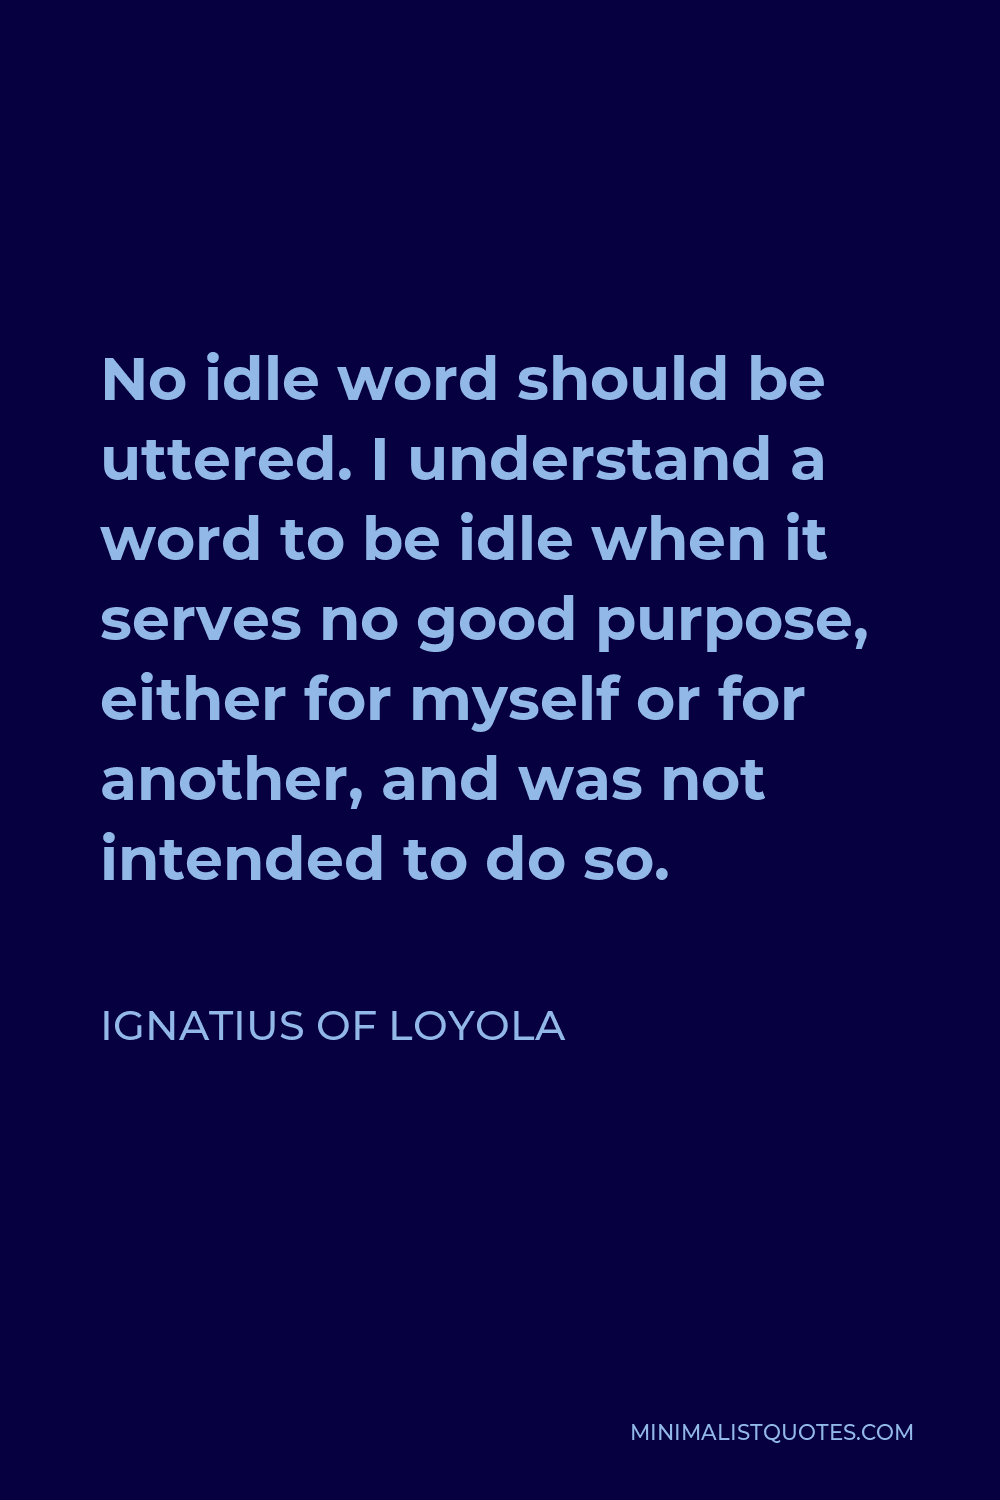 Ignatius of Loyola Quote - No idle word should be uttered. I understand a word to be idle when it serves no good purpose, either for myself or for another, and was not intended to do so.